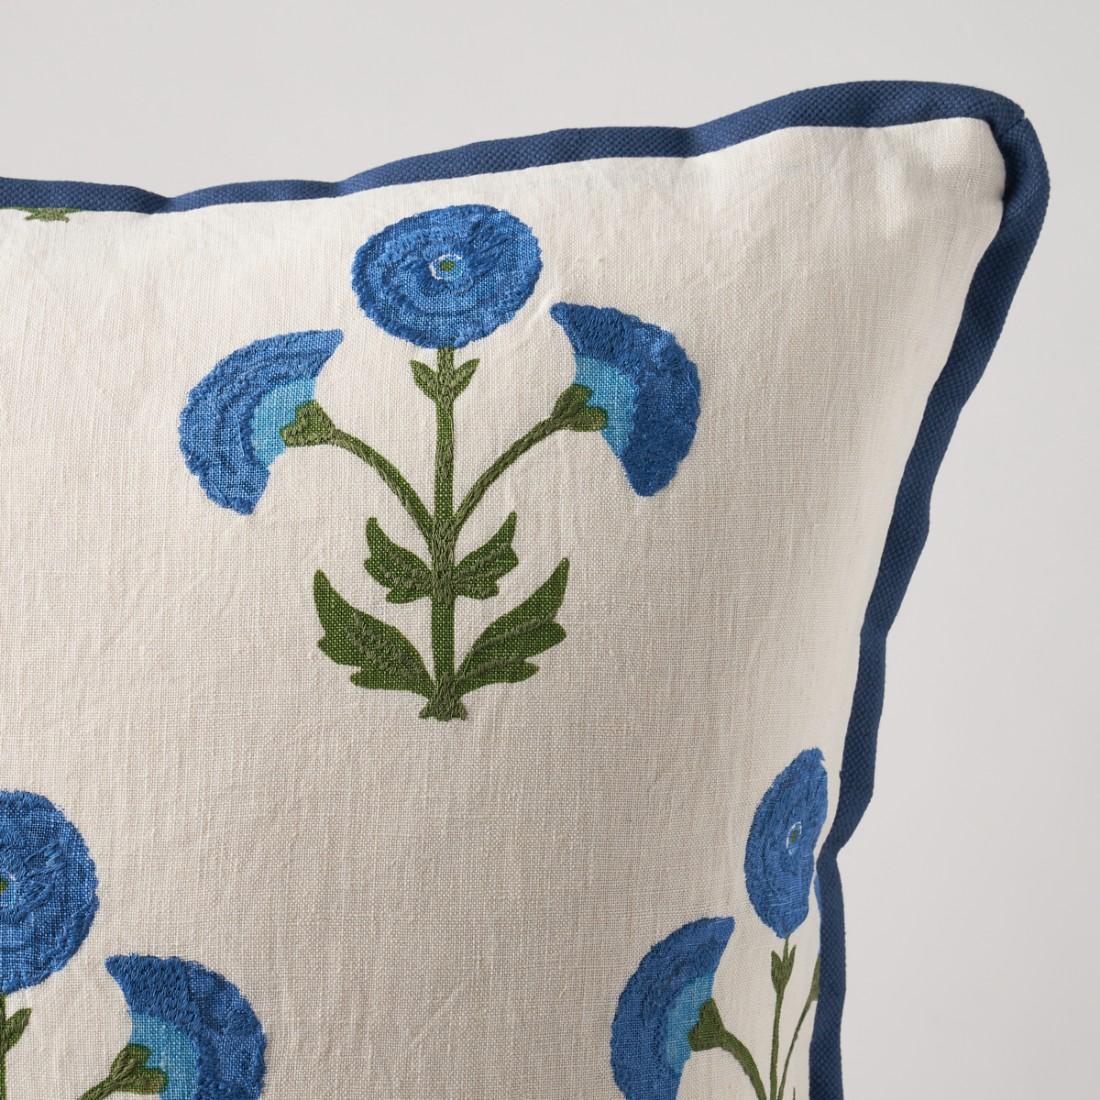 This pillow features Saranda Flower and is finished with a flange in Langham High Performance. Inspired by traditional Indian hand-block designs, this royal-colored Saranda Flower Embroidery features stylized flowers handprinted on a linen-ground